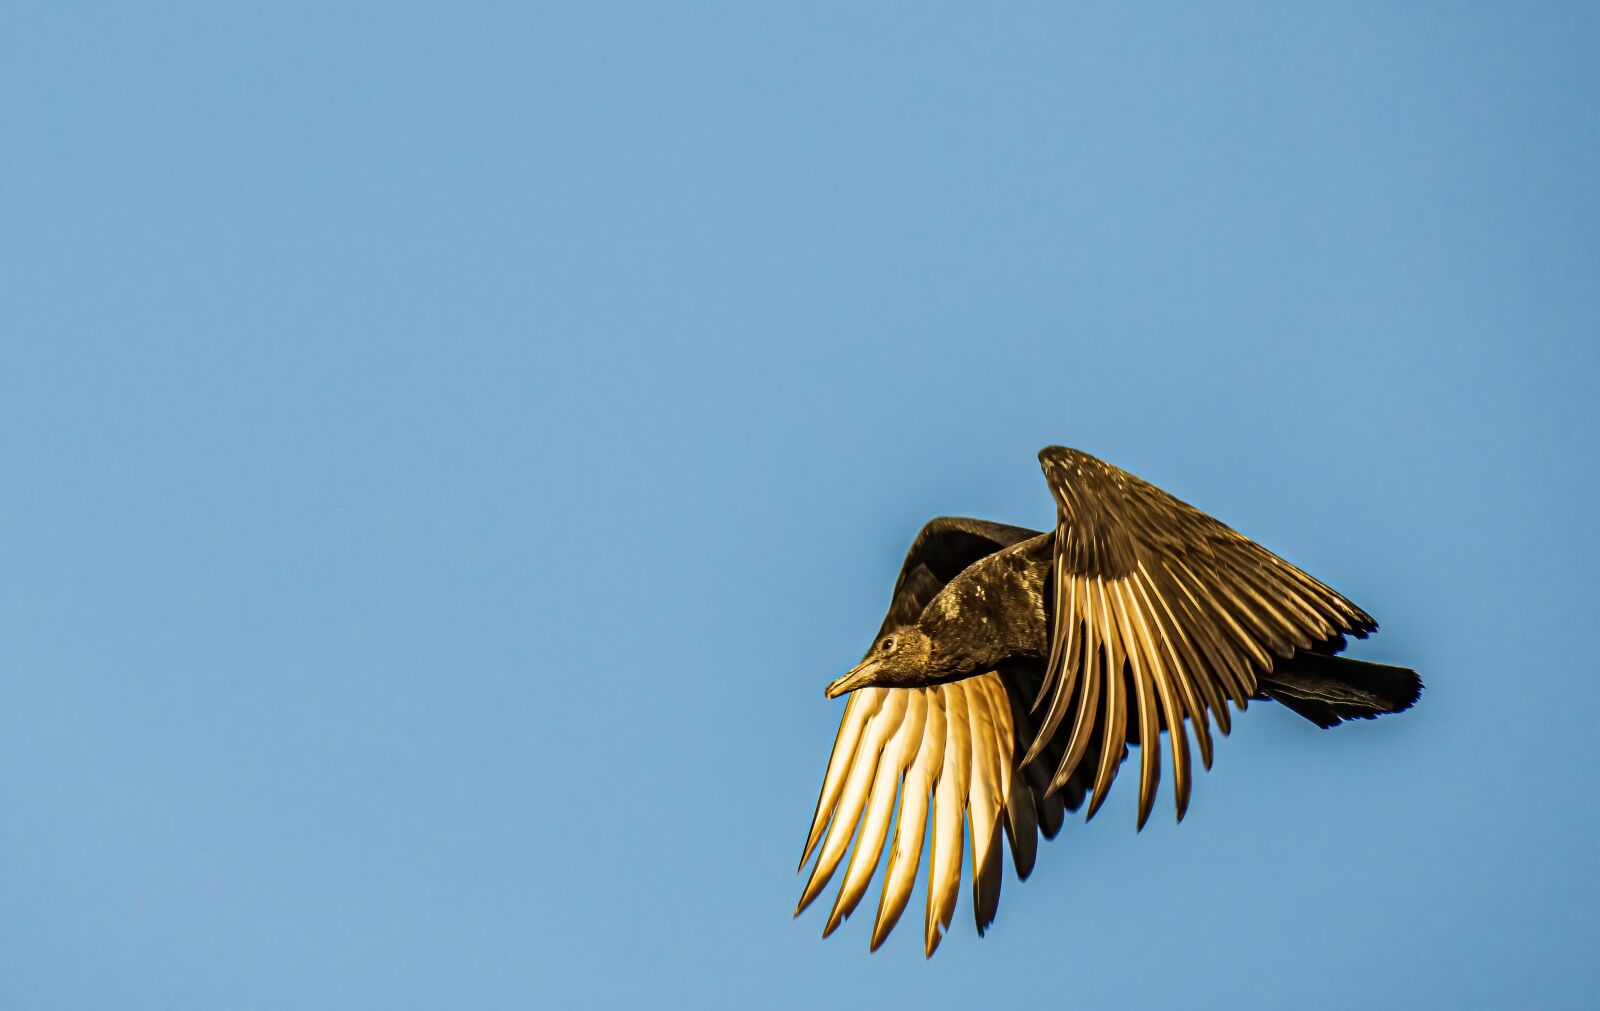 Sony a6400 sample photo. Vulture, bird, flying photography